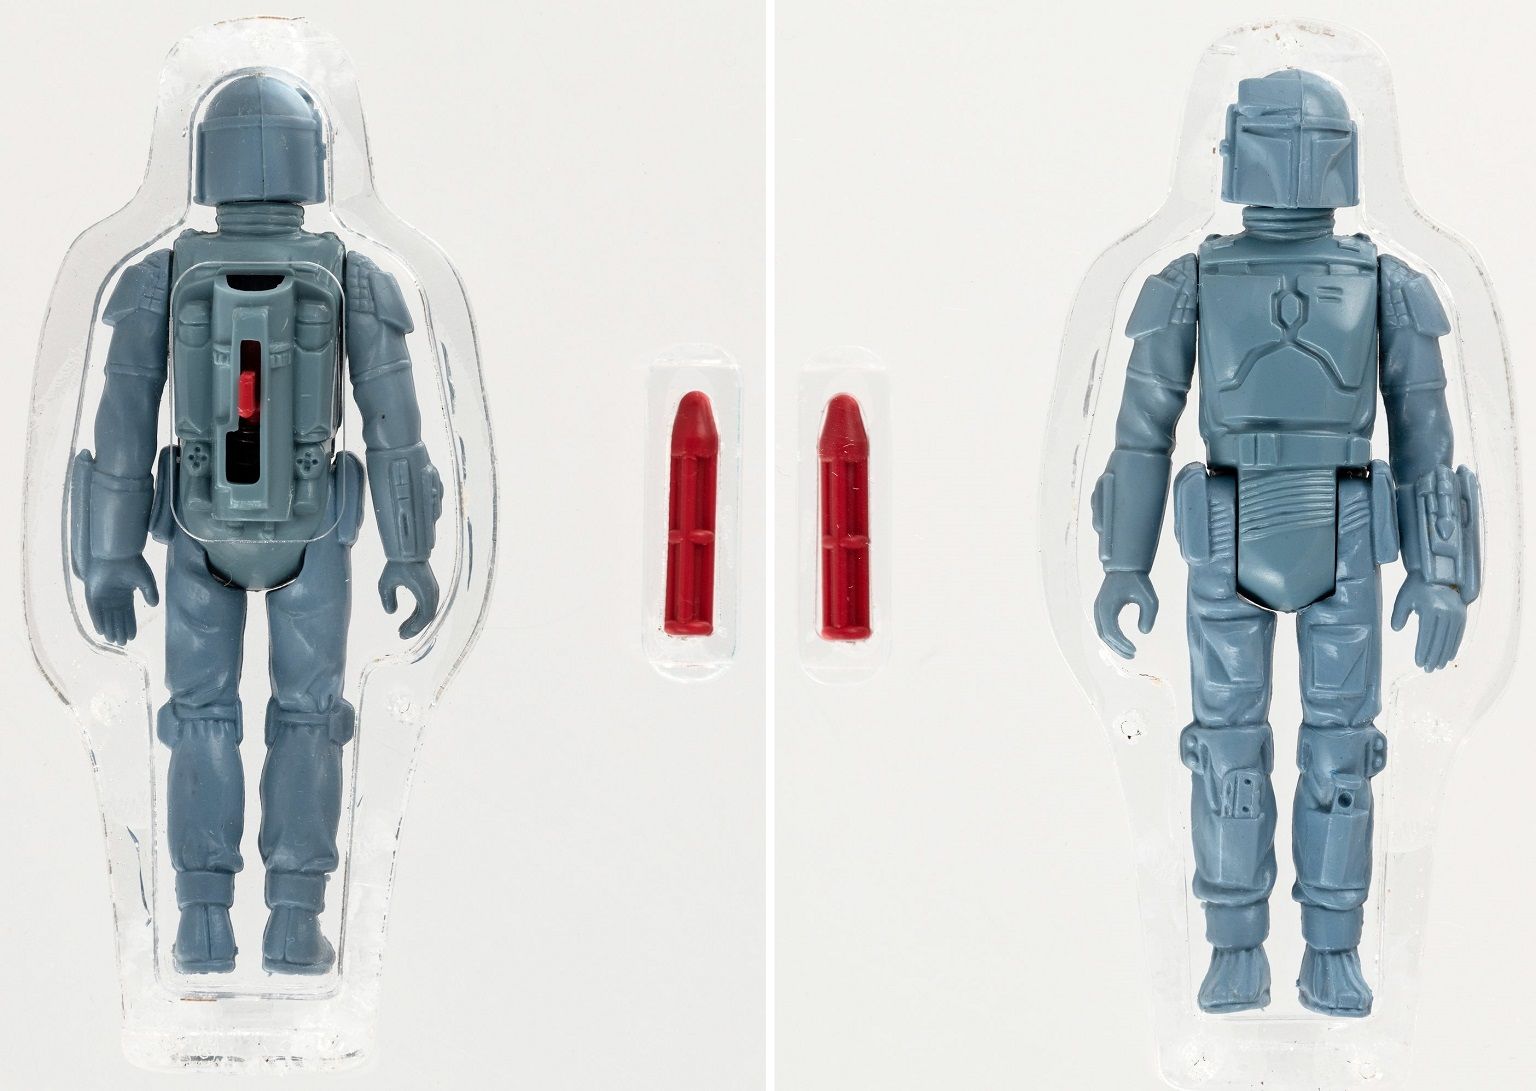 Star Wars Collectibles  Most Expensive Star Wars Toys